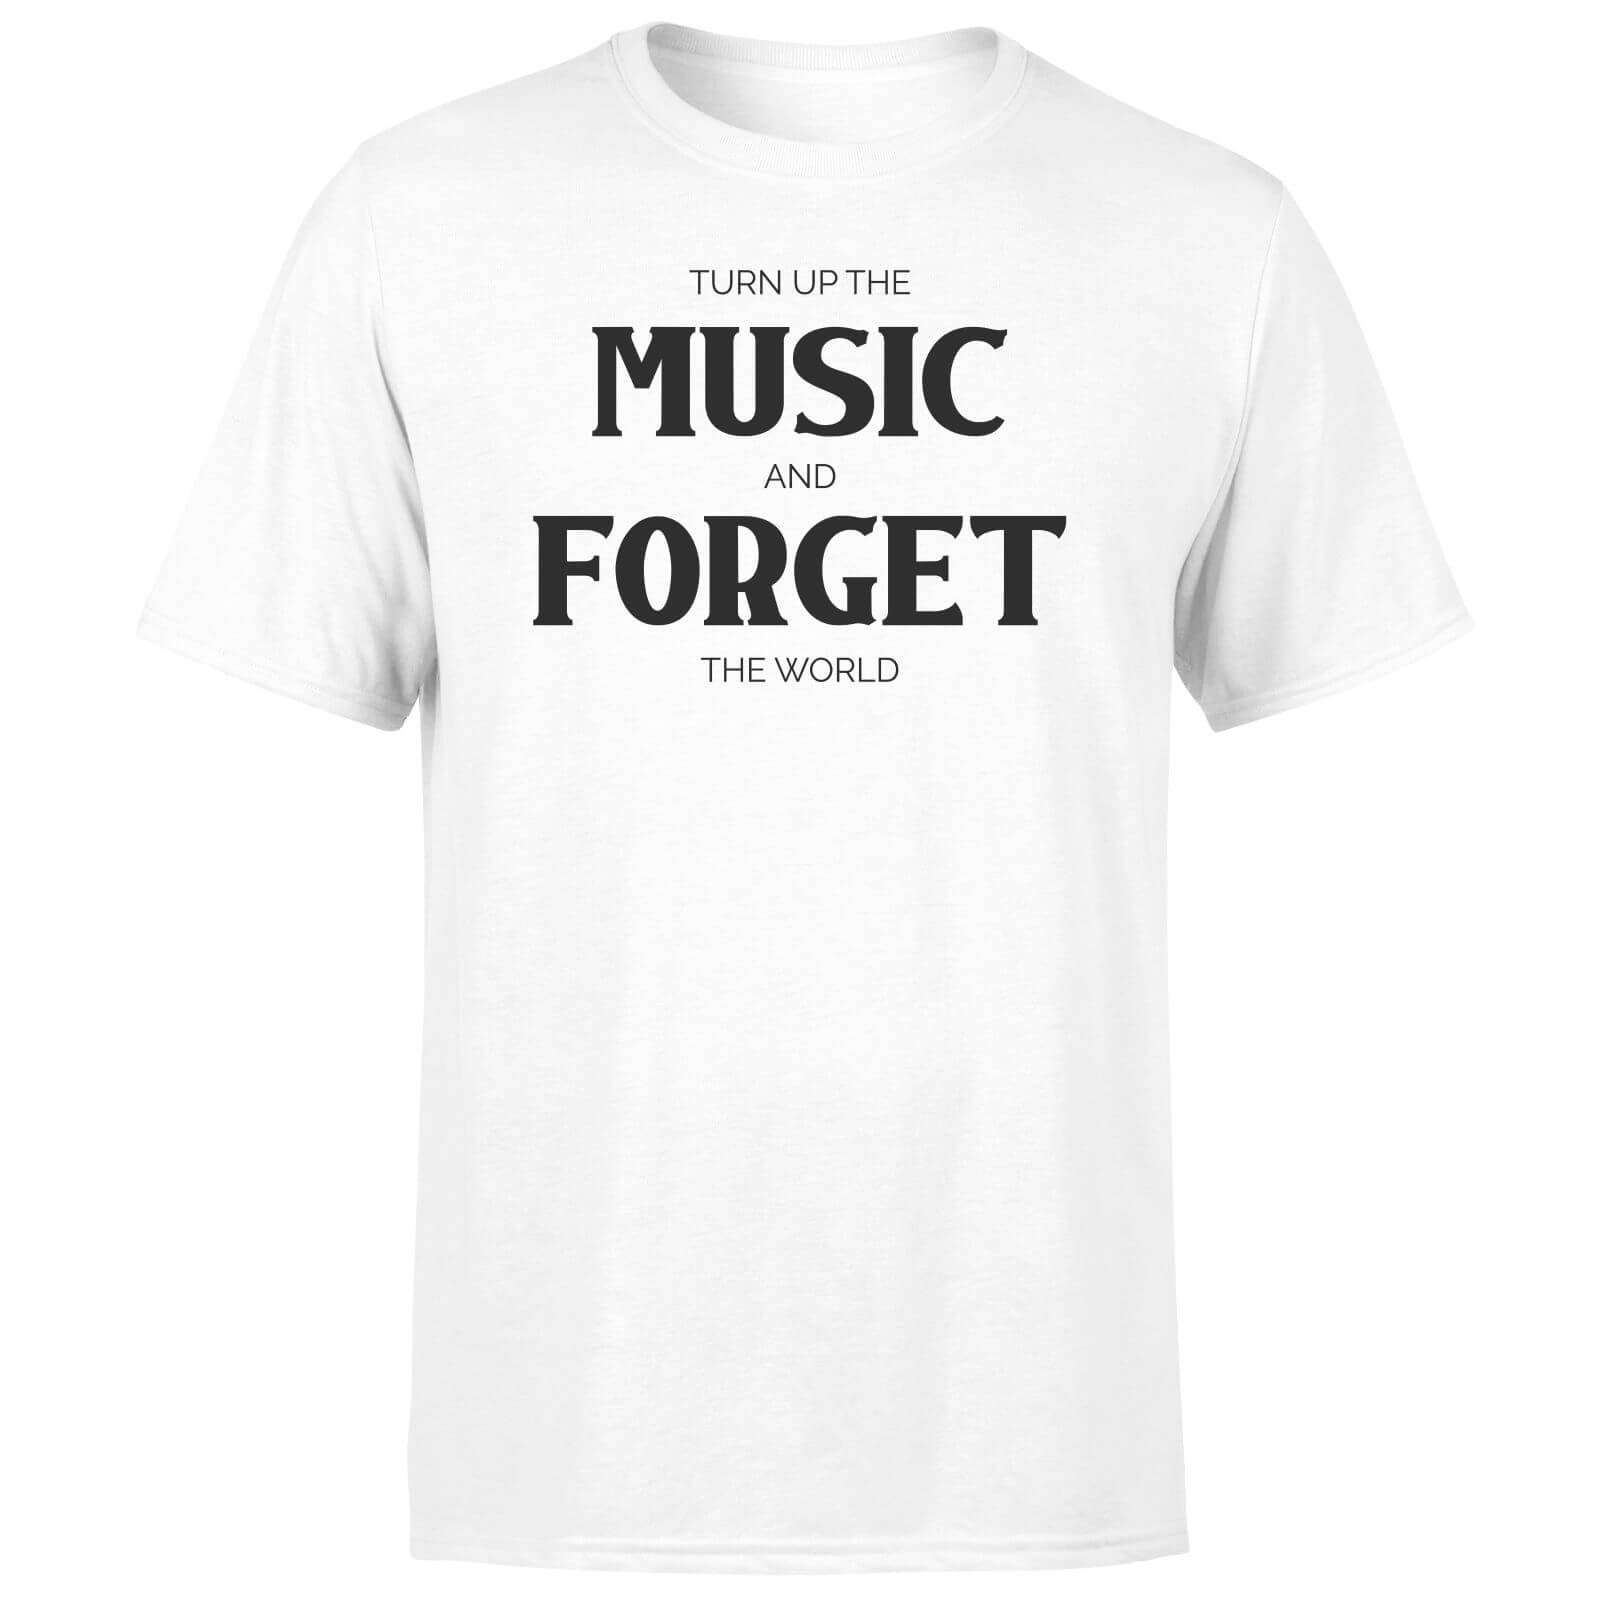 Turn Up The Music And Forget The World Men's T-Shirt - White - XS - White